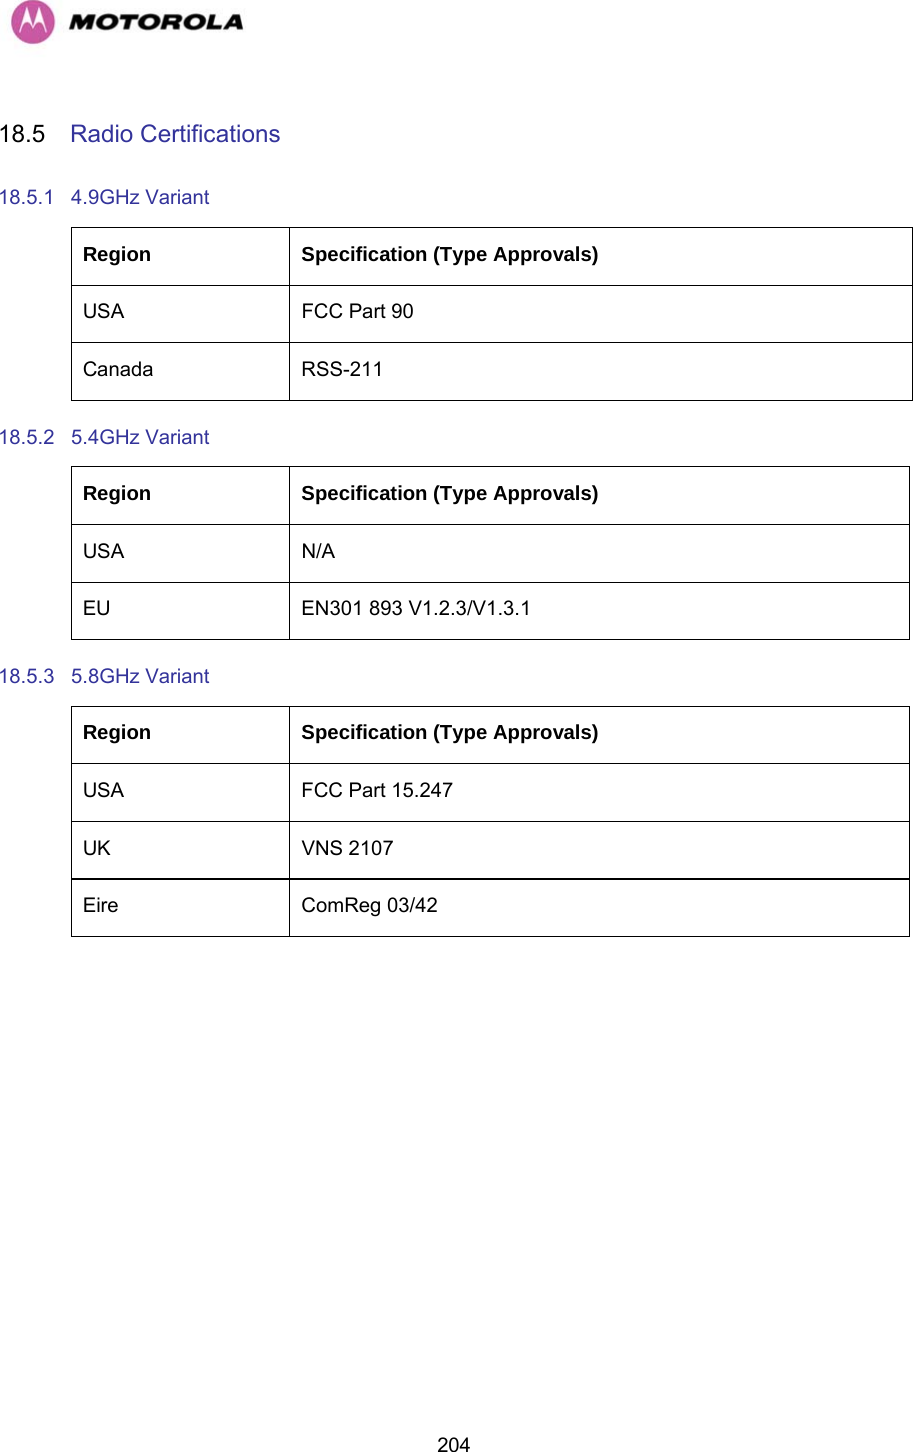   20418.5  Radio Certifications 18.5.1 4.9GHz Variant Region Specification (Type Approvals) USA  FCC Part 90 Canada RSS-211 18.5.2 5.4GHz Variant Region Specification (Type Approvals) USA N/A EU  EN301 893 V1.2.3/V1.3.1 18.5.3 5.8GHz Variant Region Specification (Type Approvals) USA  FCC Part 15.247 UK VNS 2107 Eire ComReg 03/42 